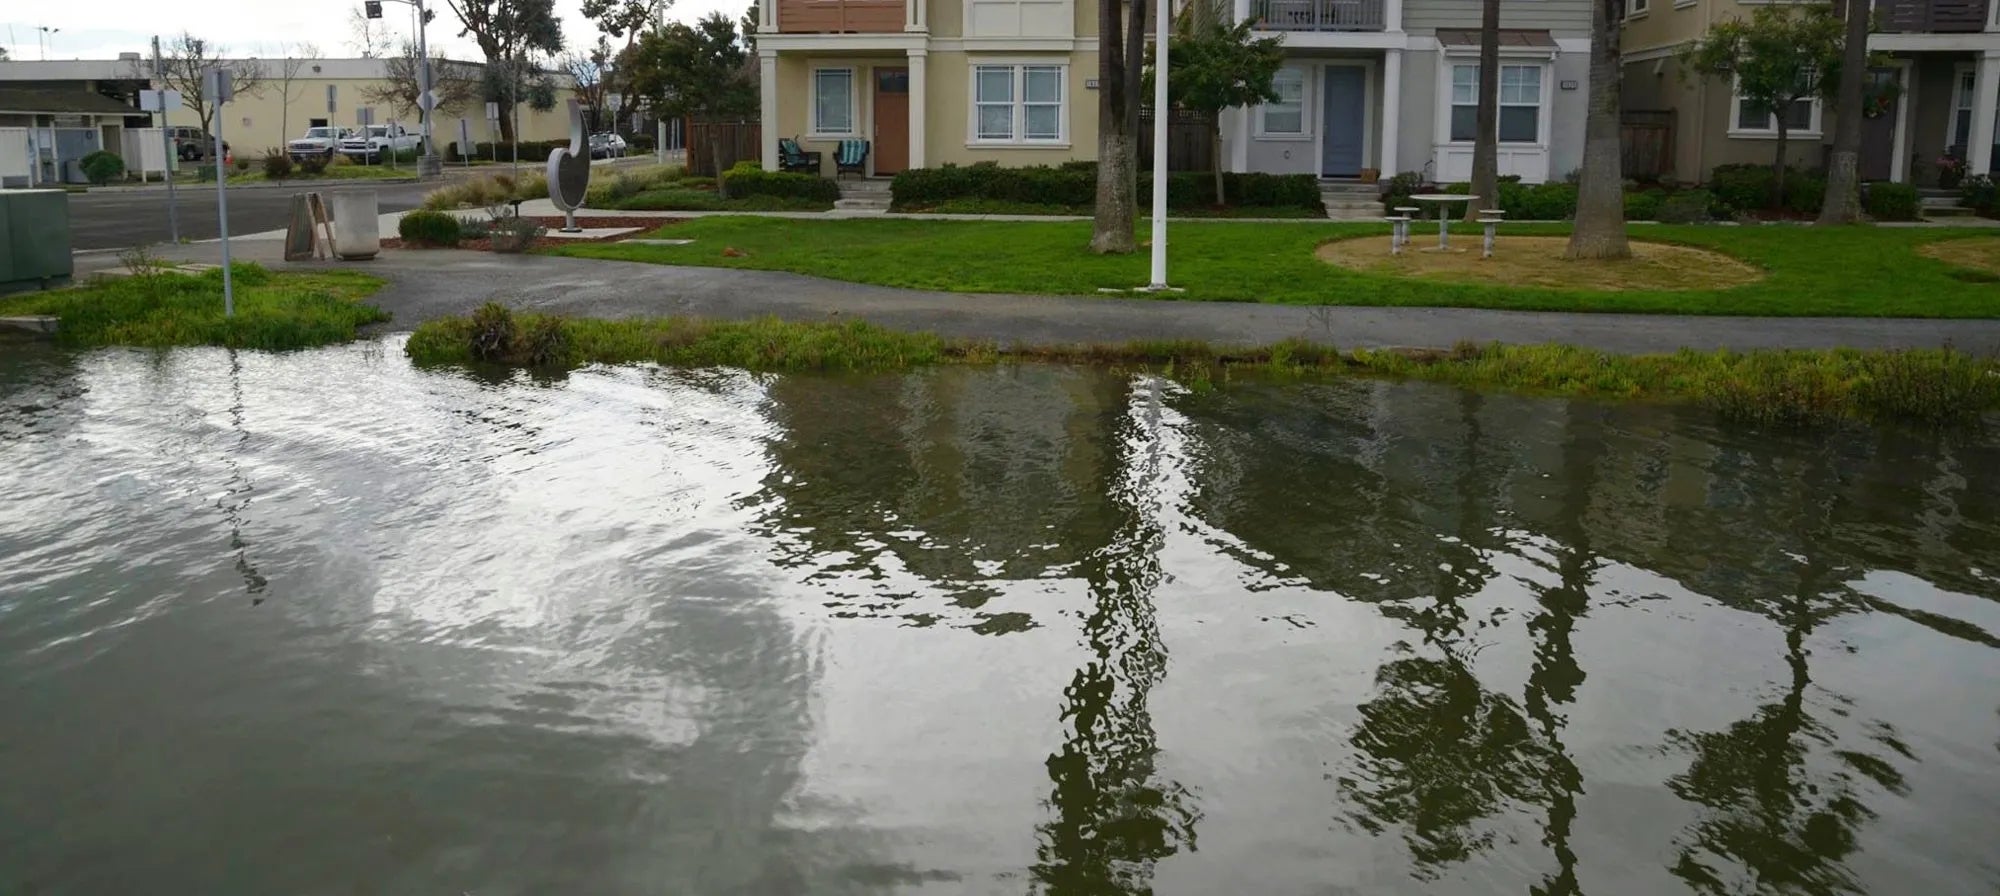 The Grand Marina's footpath in Alameda. The new condos have raised steps up to their front doors (about 1 foot high), but during a high tide with storm surges residents will have to walk through water to get to their front doors.